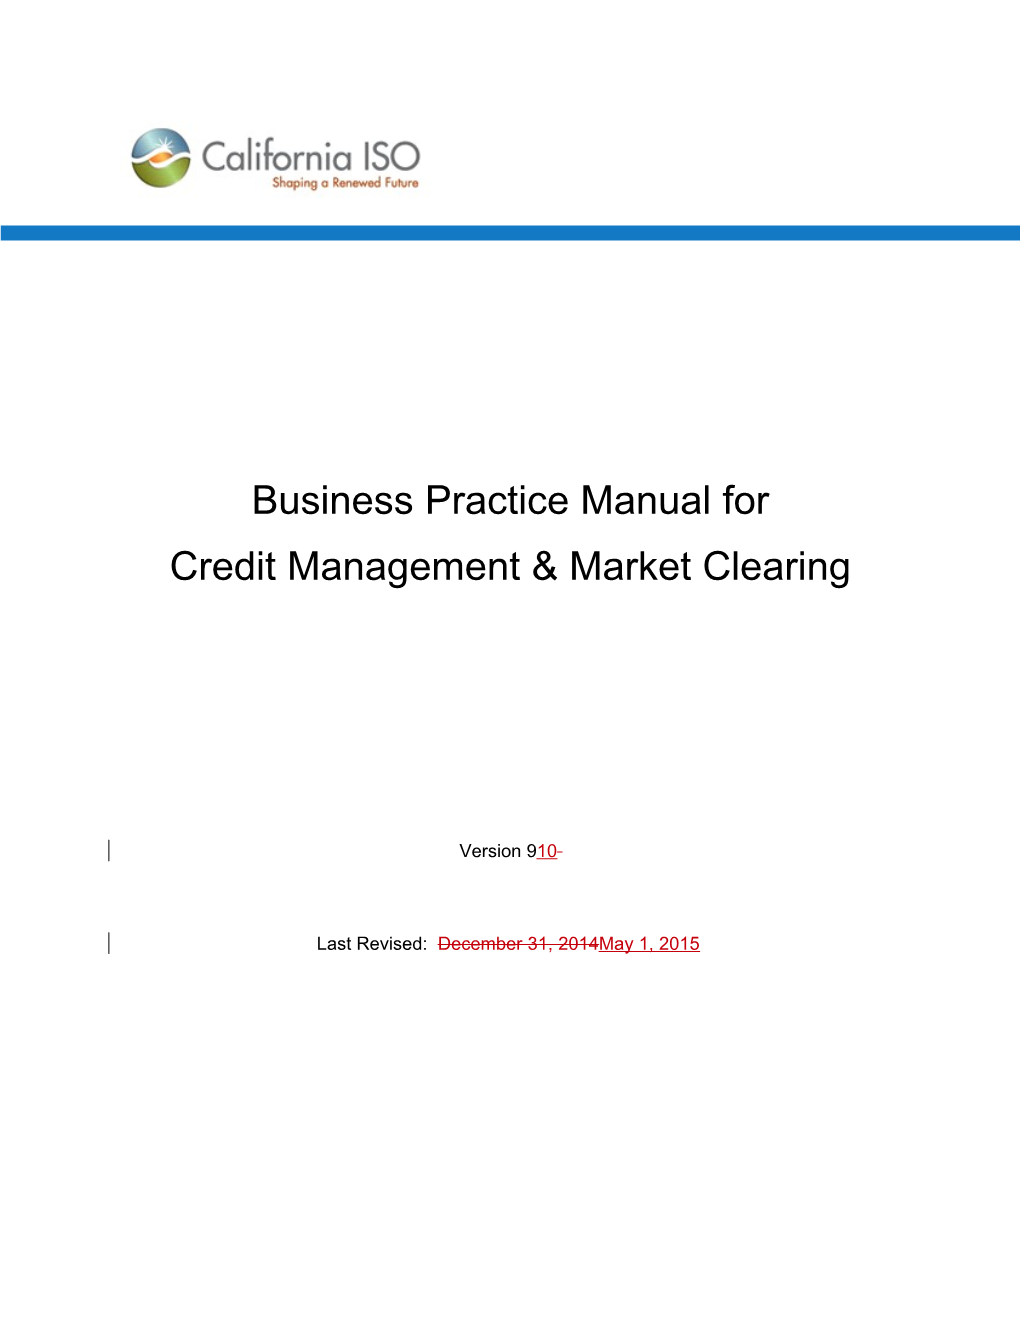 CAISO Business Practice Manualbpm for Credit Management & Market Clearing